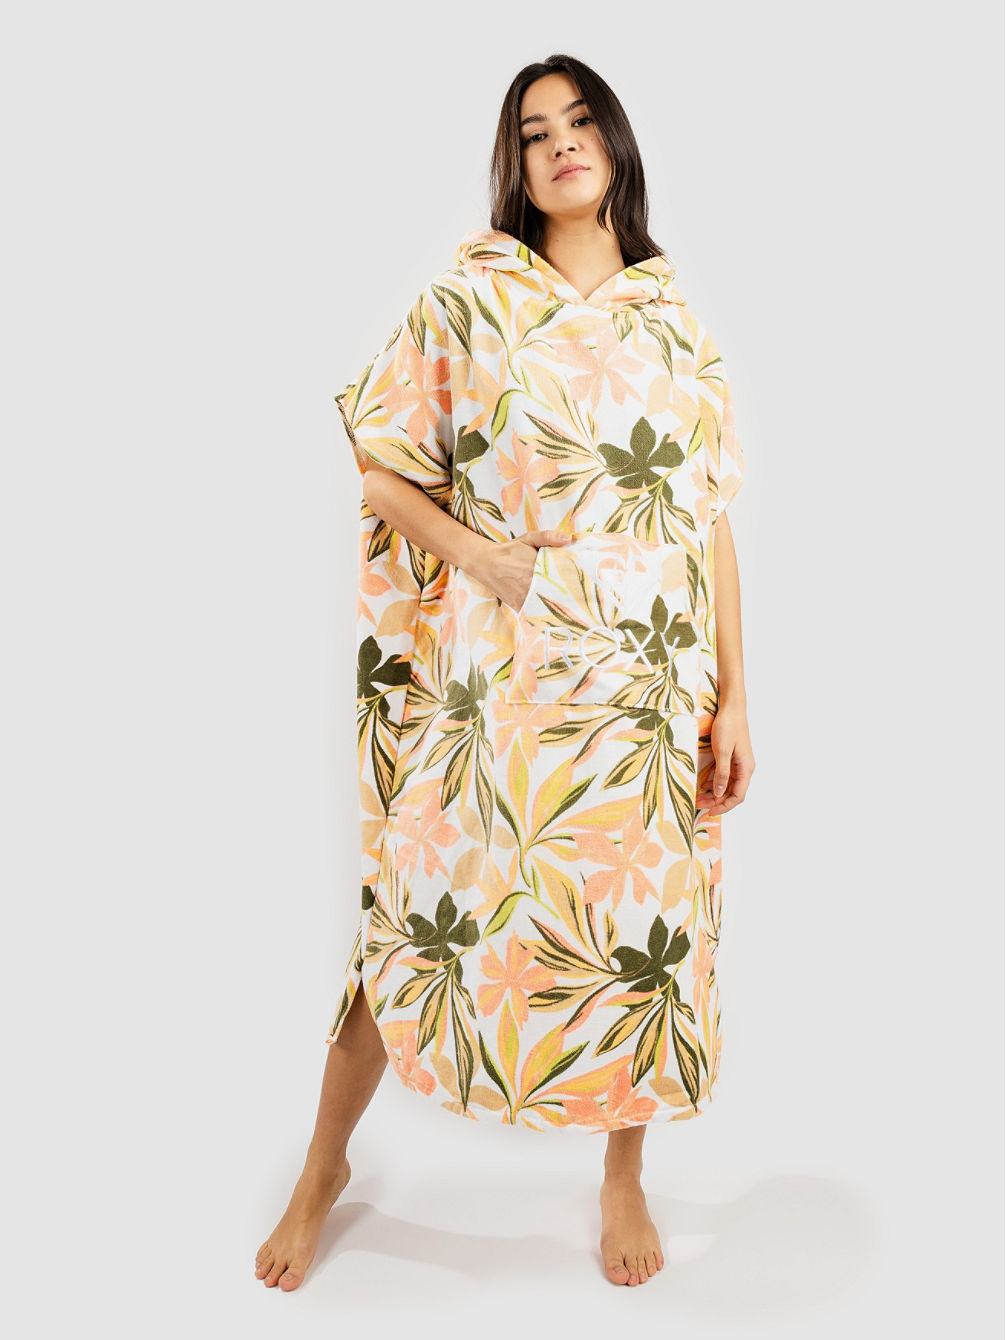 Stay Magical Printed Surf poncho